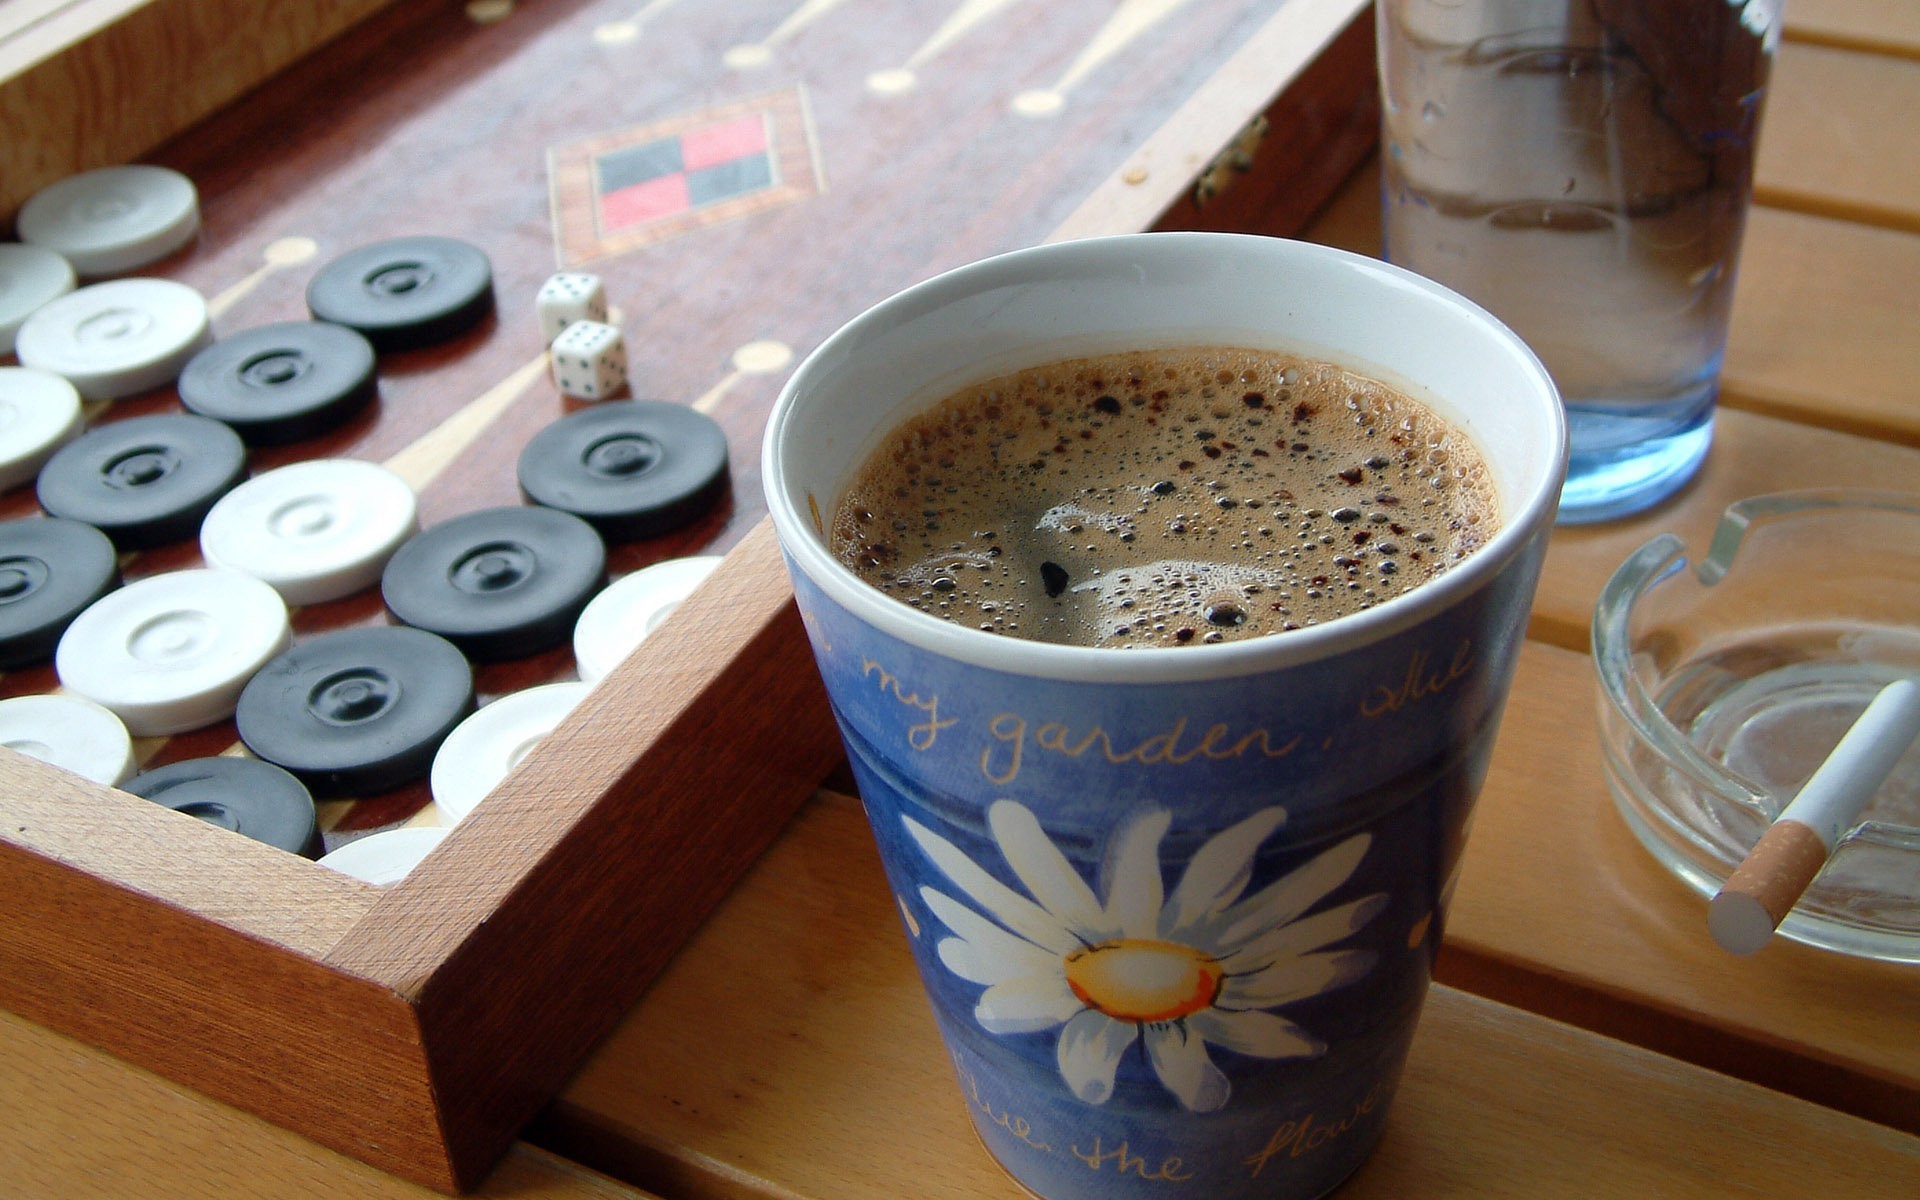 General 1920x1200 dice coffee cup wooden surface cigarettes backgammon closeup board games drink ashtrays